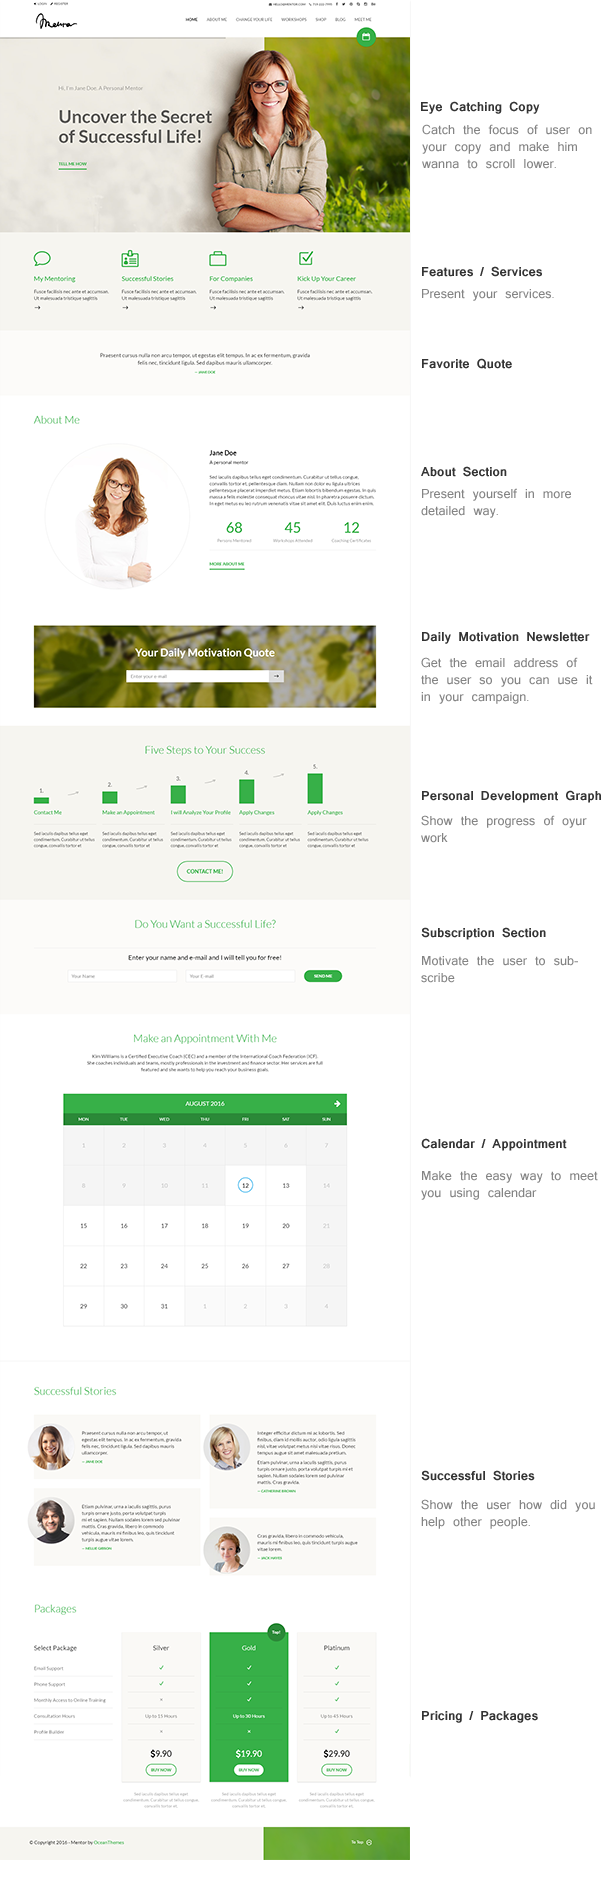 Mentor - Personal Development Coach WordPress Theme for made coaches, trainers, therapist or other profession